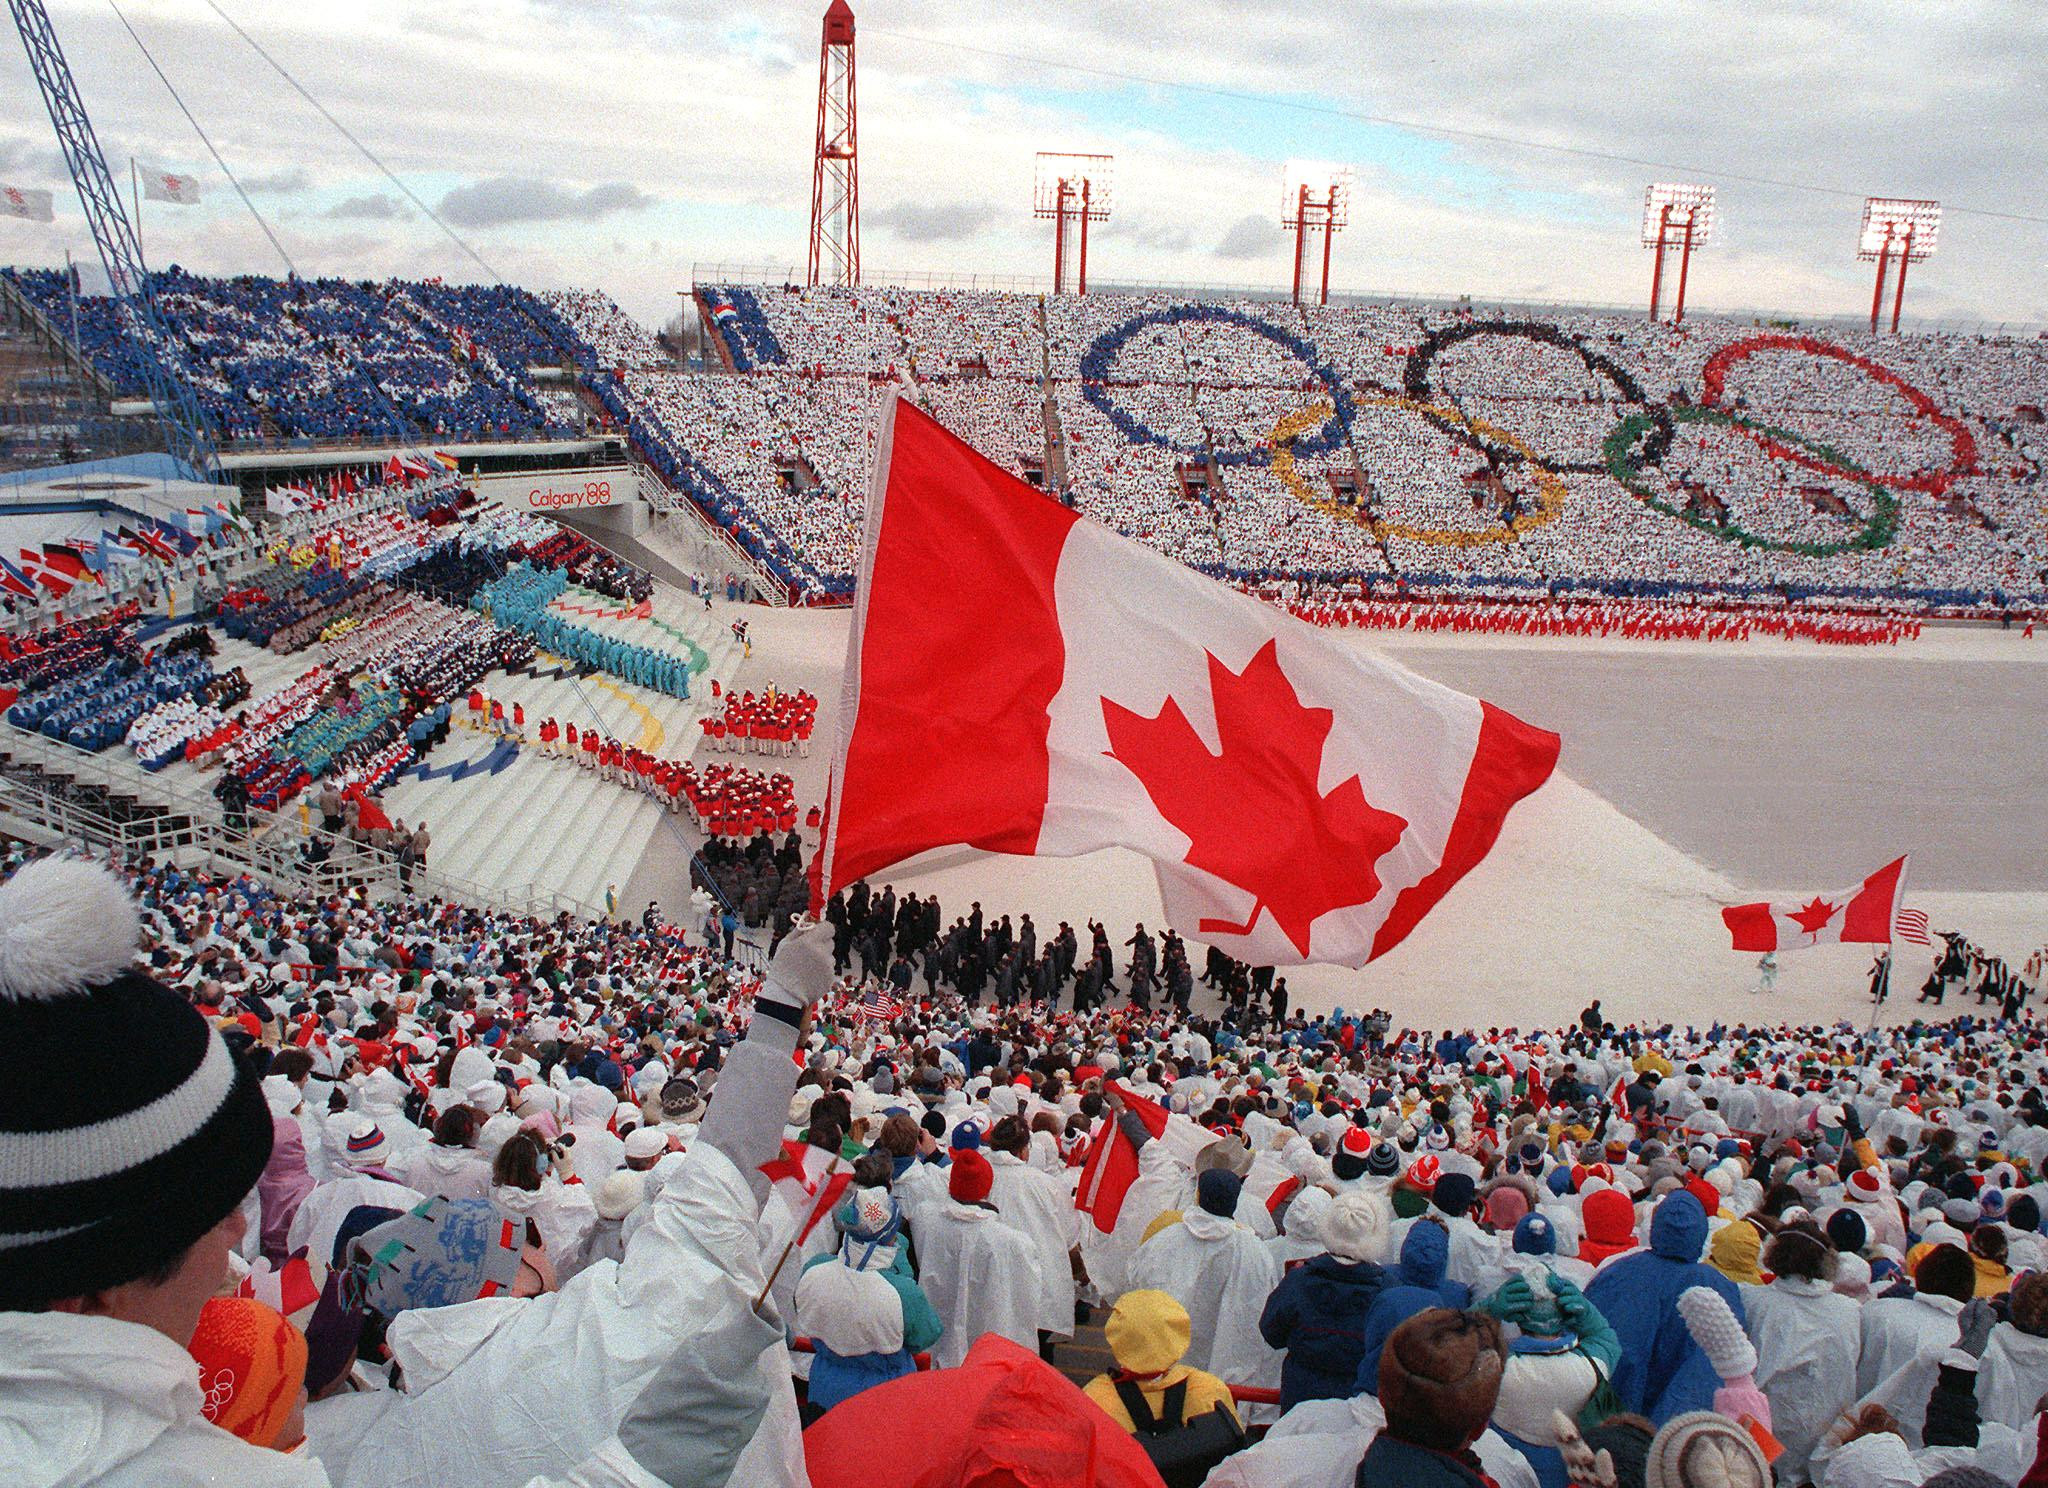 Calgary held the Winter Olympics in 1988, but a public vote rejected plans to bid for the 2026 edition  ©Getty Images